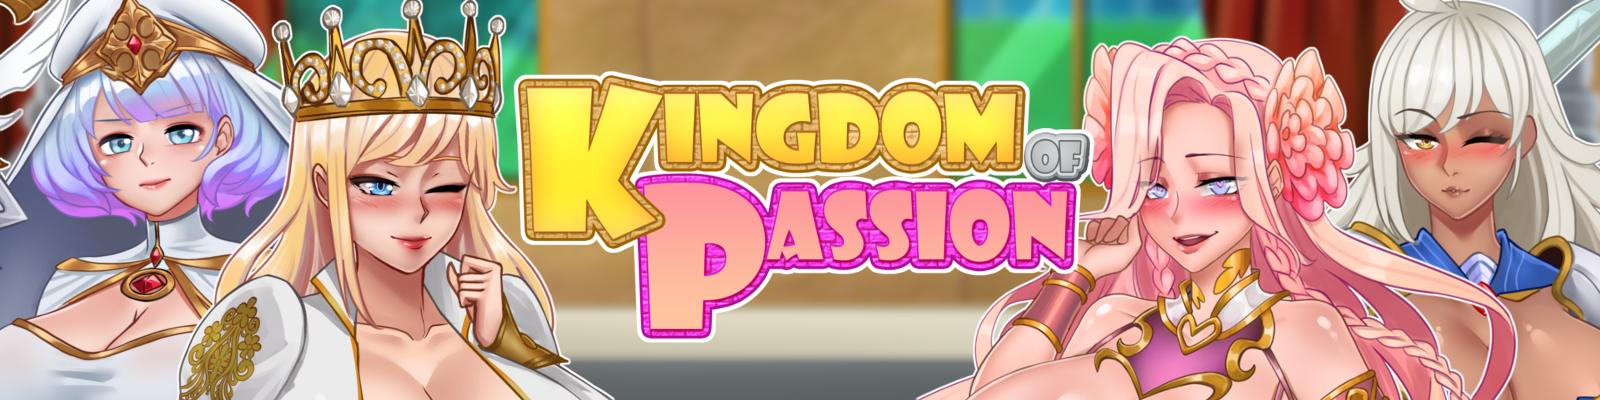 Kingdom of Passion [Siren's Domain Paradise] Adult xxx Game Download